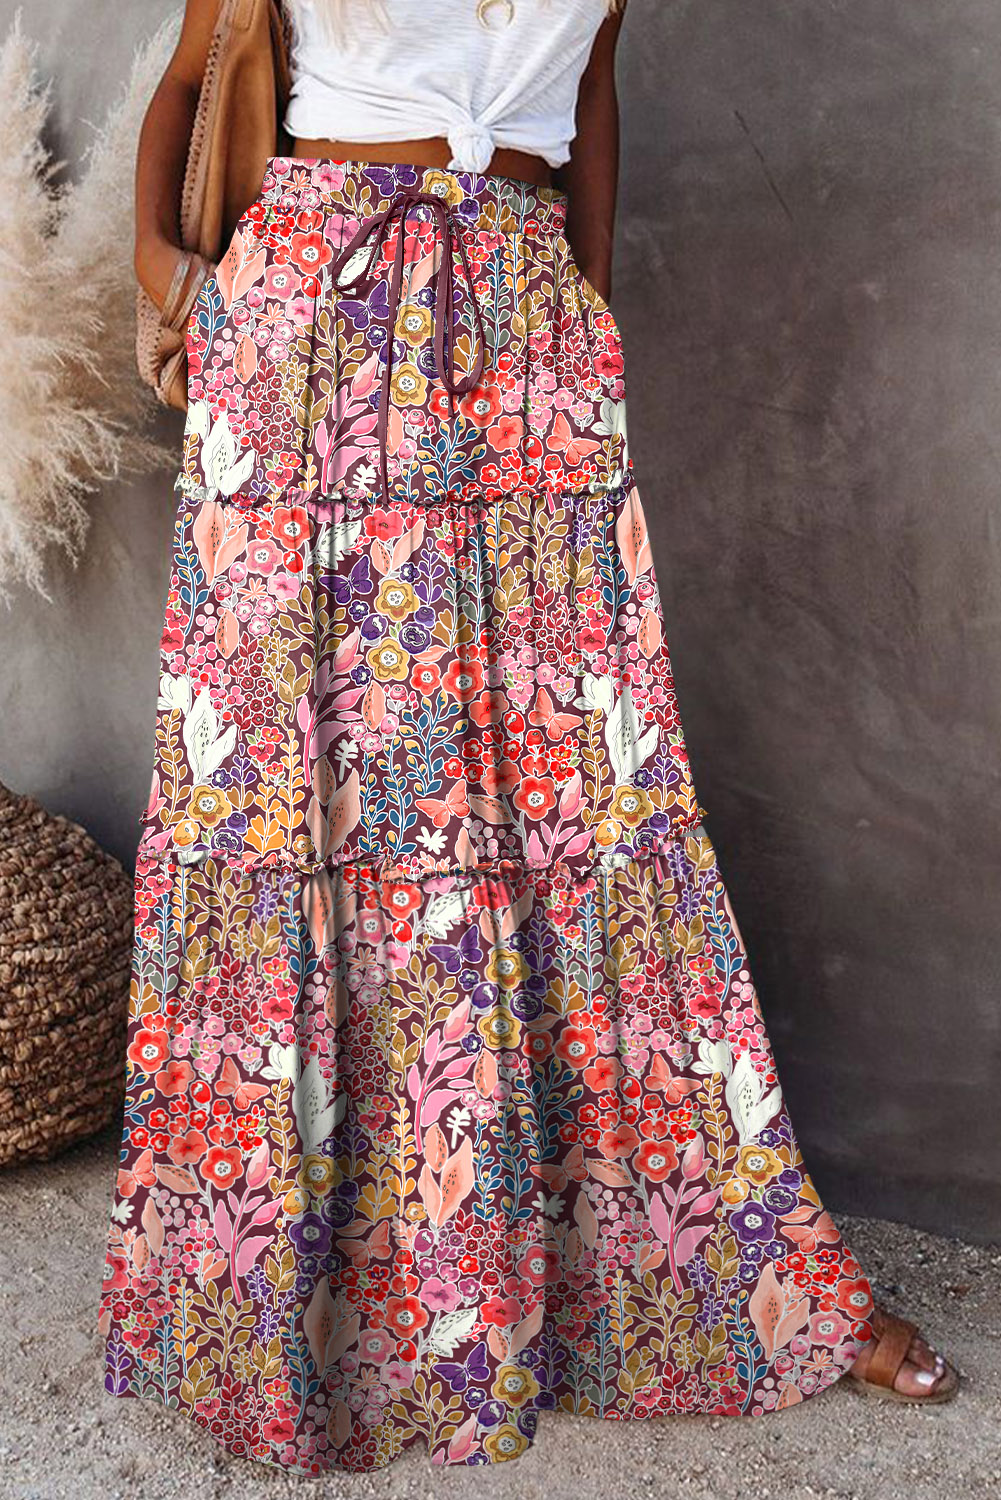 Shewin Wholesale Clothing Stores Multicolor Boho Floral Print High Waist Maxi SKIRT